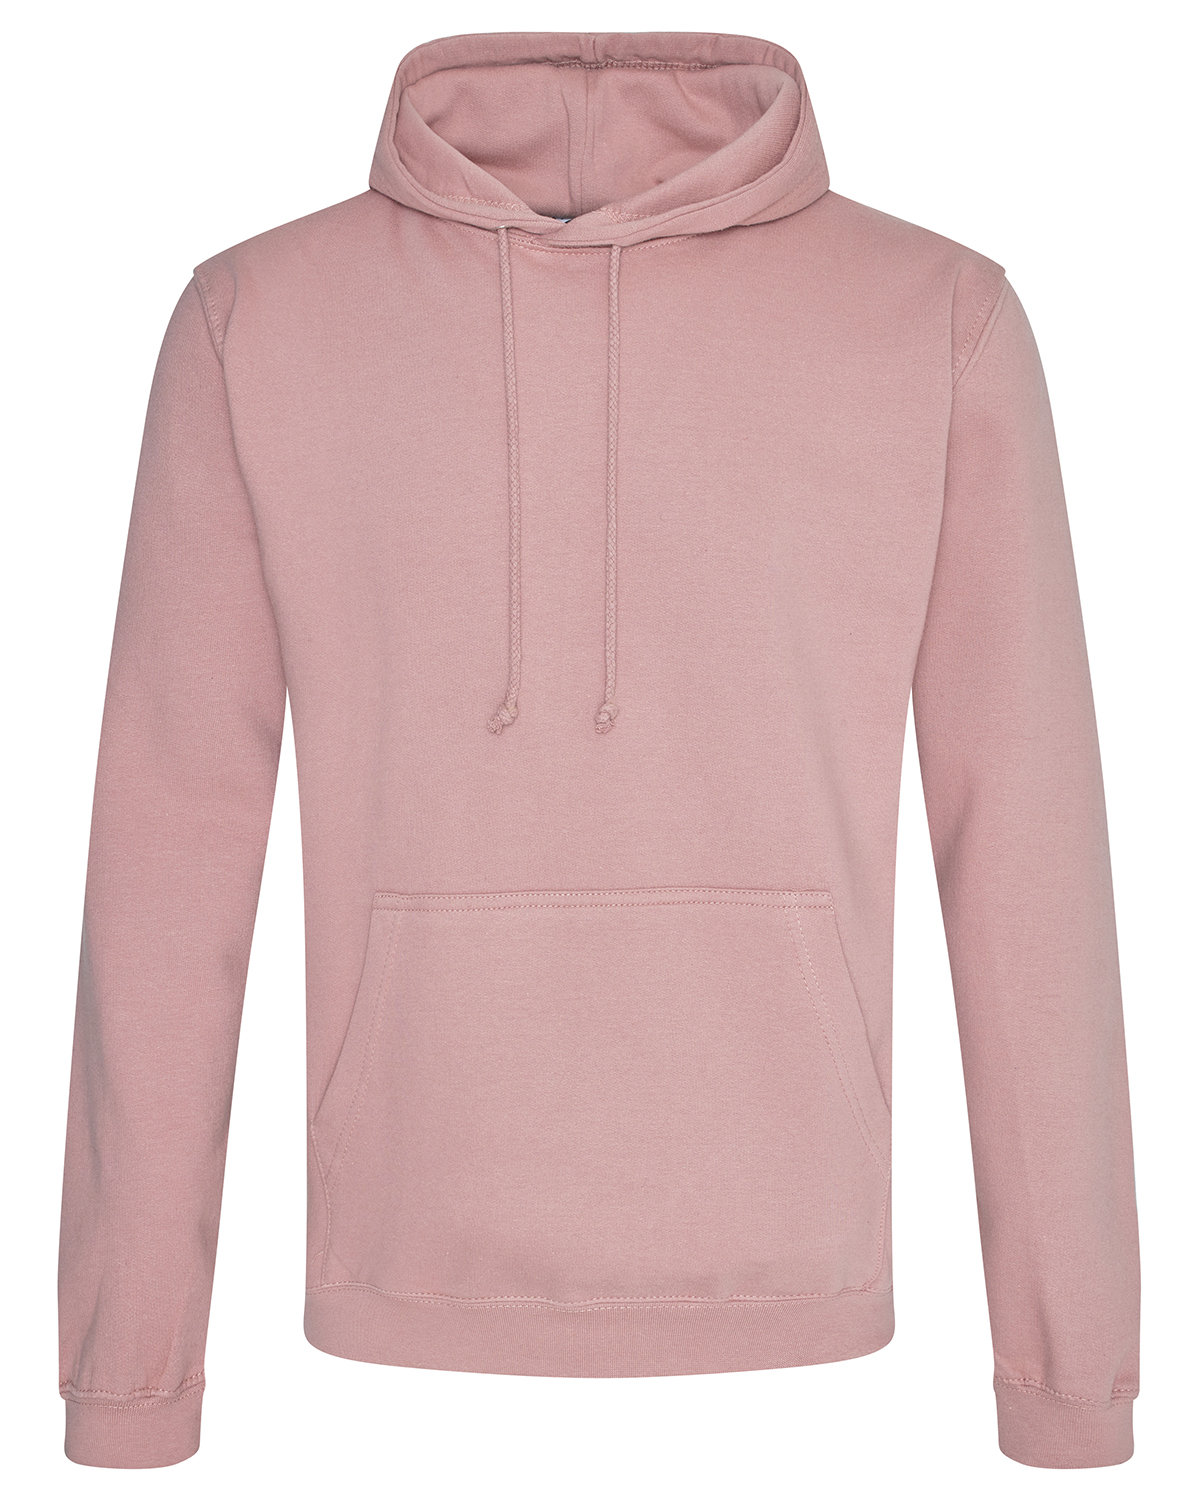 Just Hoods By AWDis Men's 80/20 Midweight College Hooded Sweatshirt DUSTY PINK 